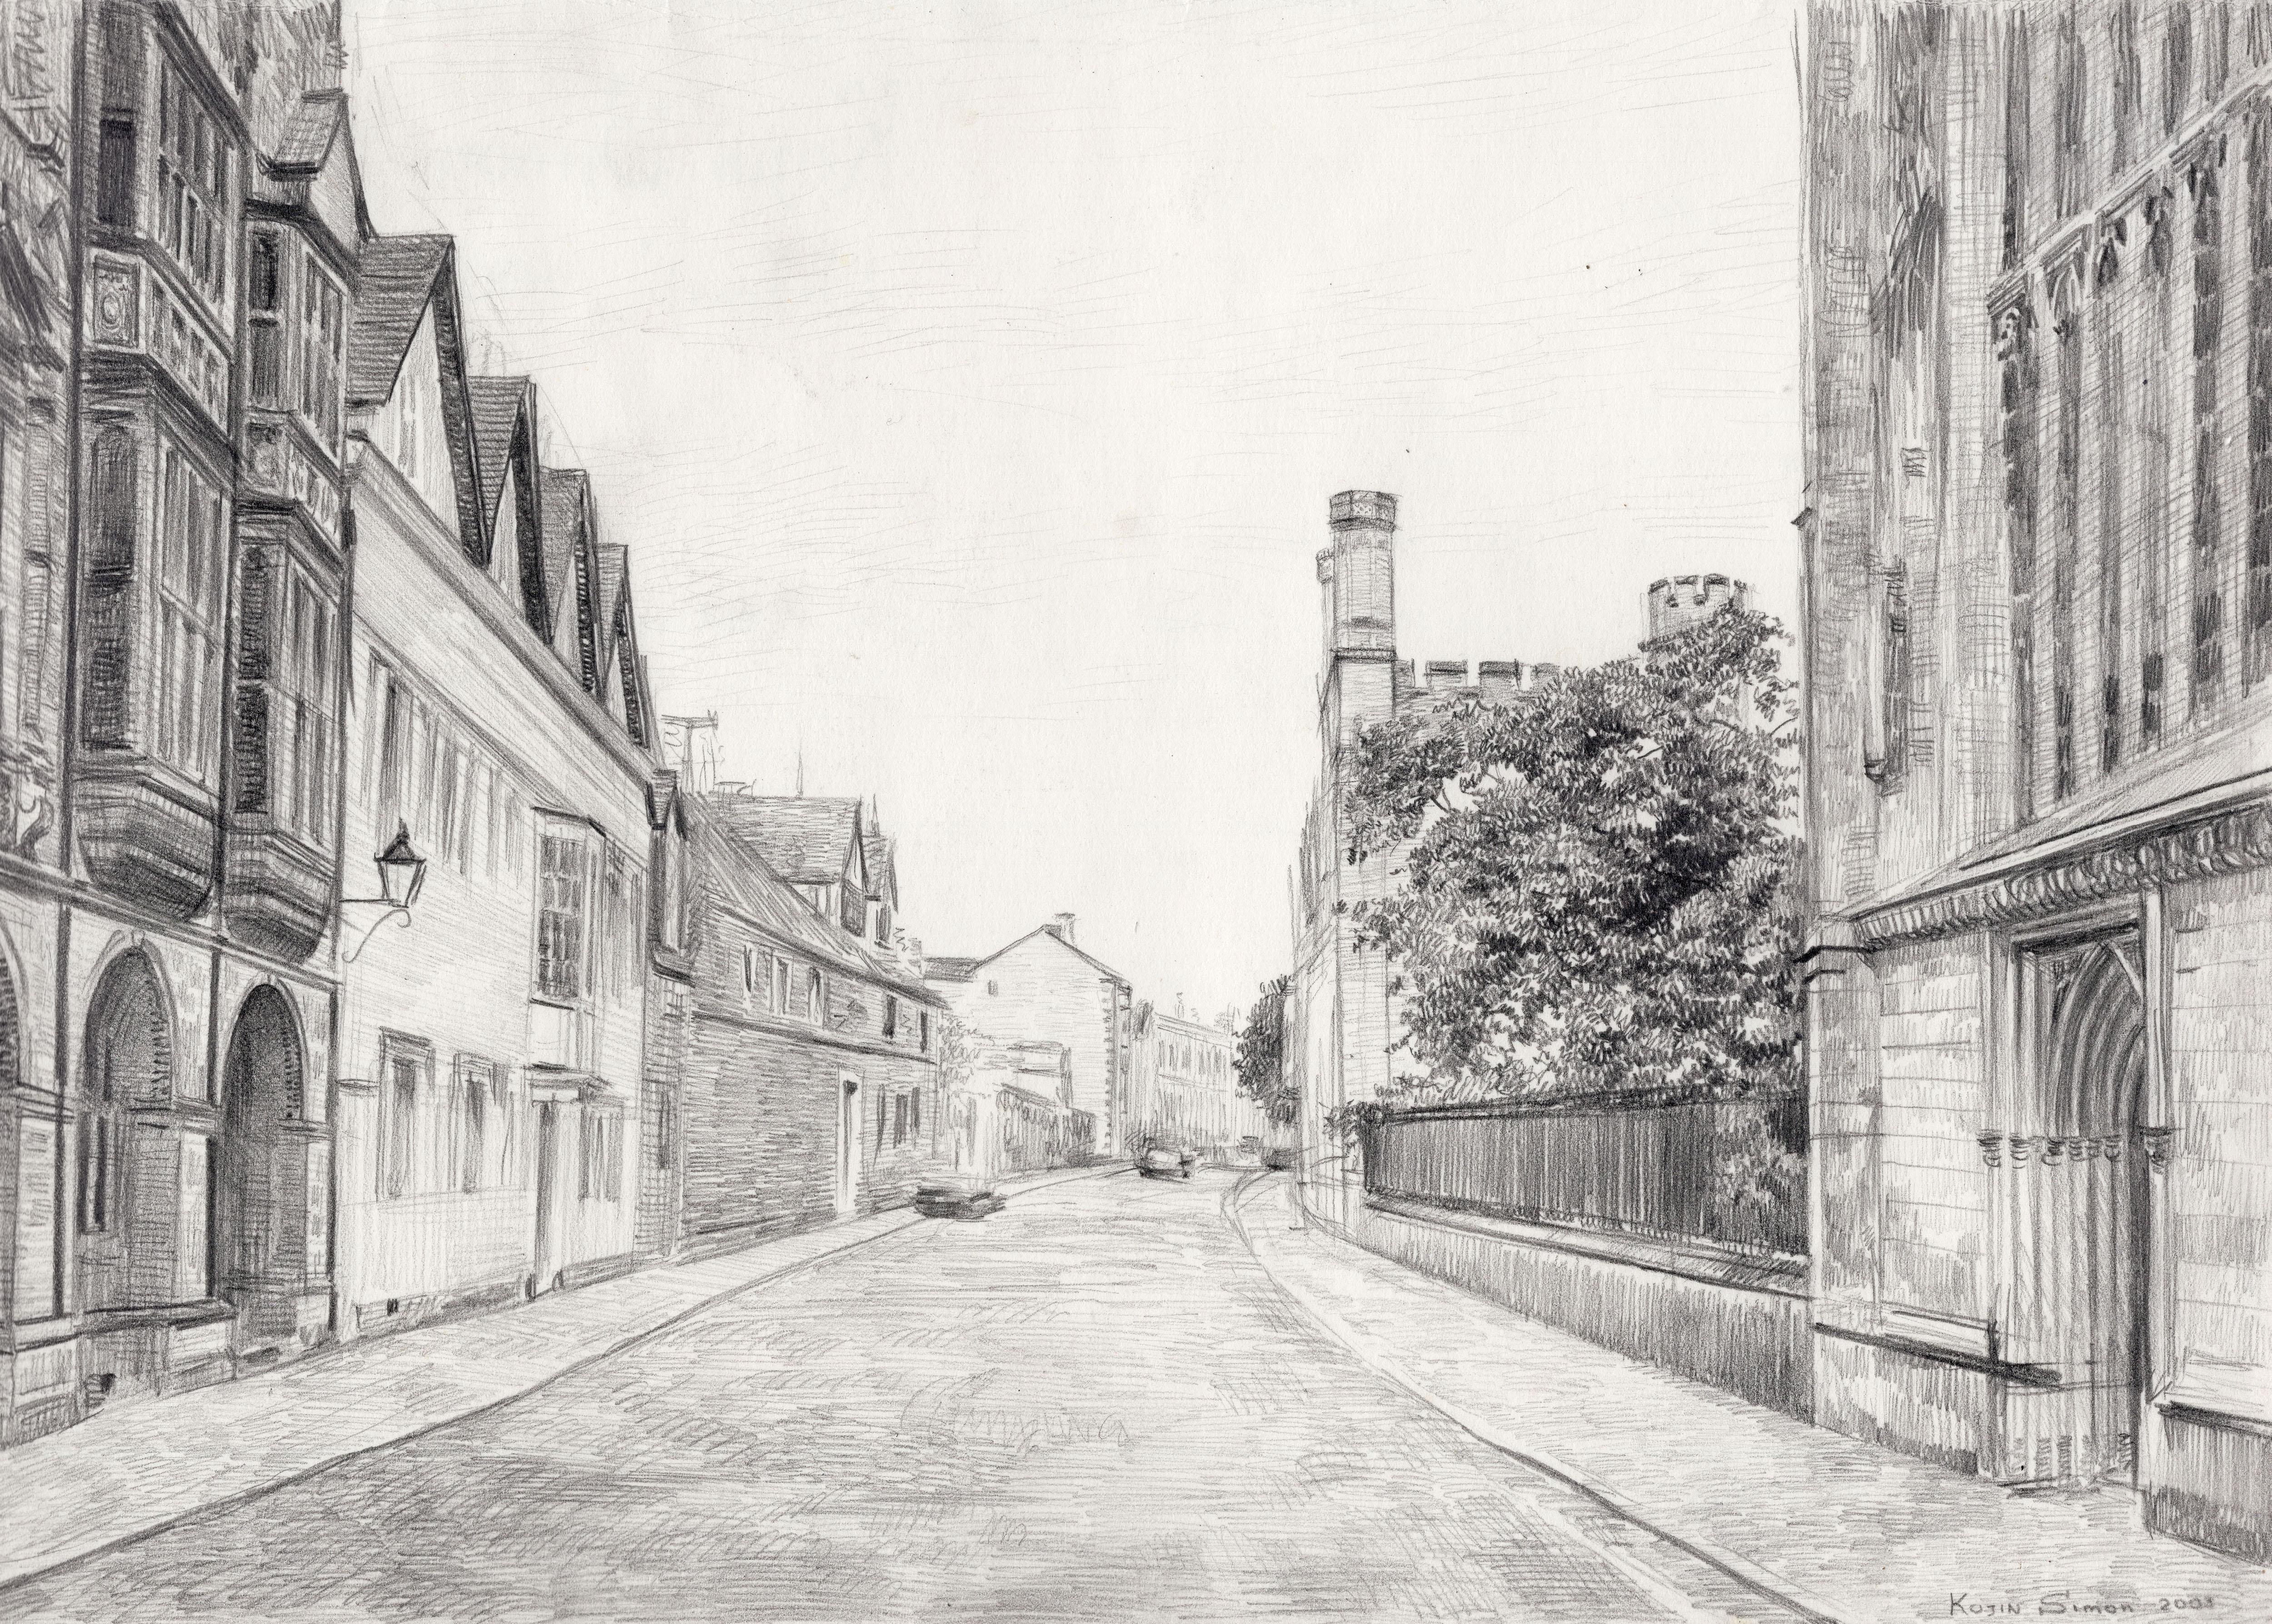 I made this sketch from nature while I was in one of the old and beautiful streets of Oxford. It was a gray day, sometimes it started to rain a little, and there were not many people outside. Gothic-style stone buildings are pleasing to the eye of